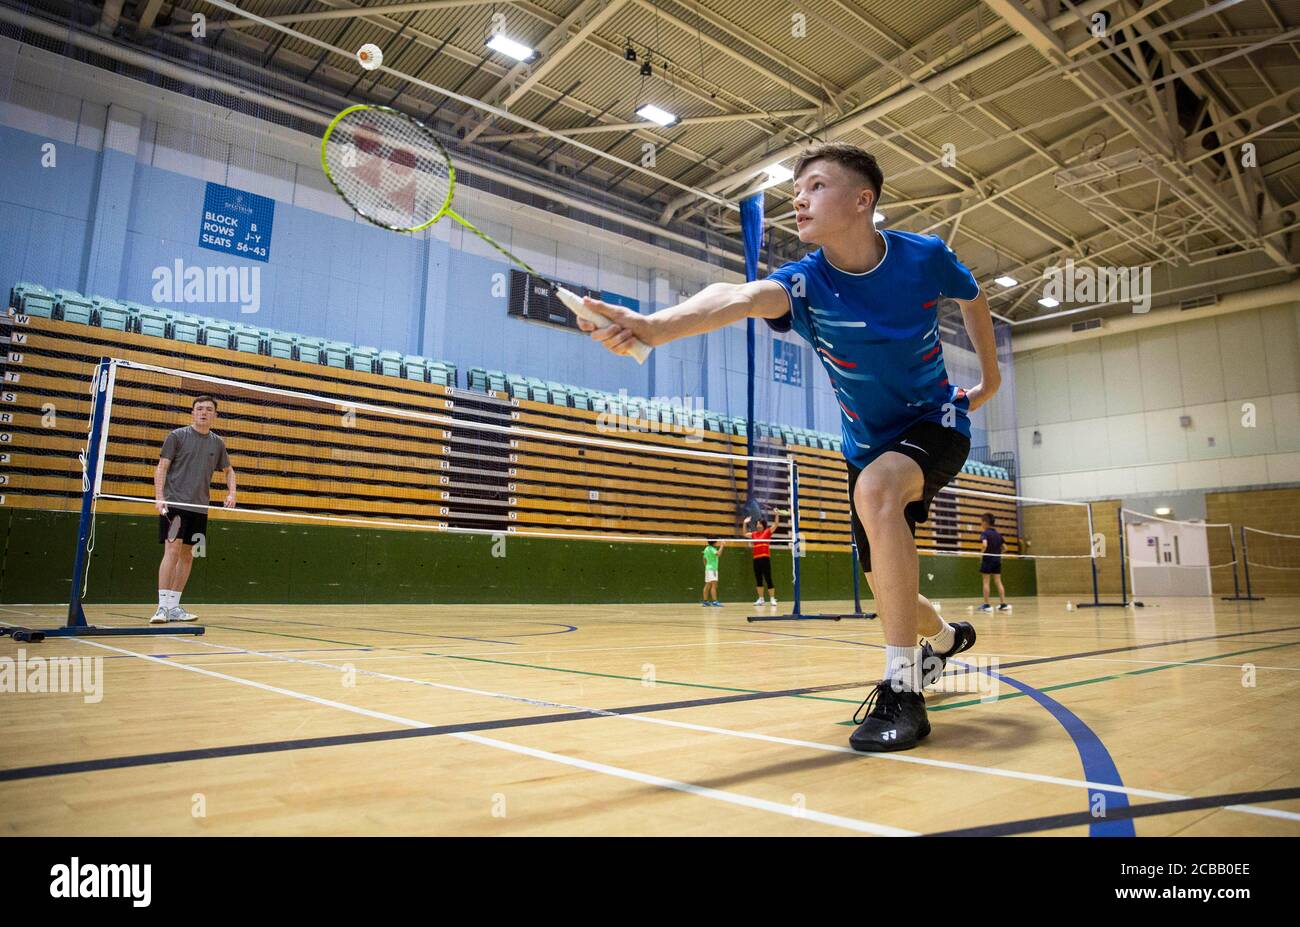 EDITORIAL USE ONLY Badminton player, Dylan Saunders (aged 15) from  Winchester enjoys getting back on court during an Indoor Sports Collective  Day organised by Badminton England, which aims to highlight the importance